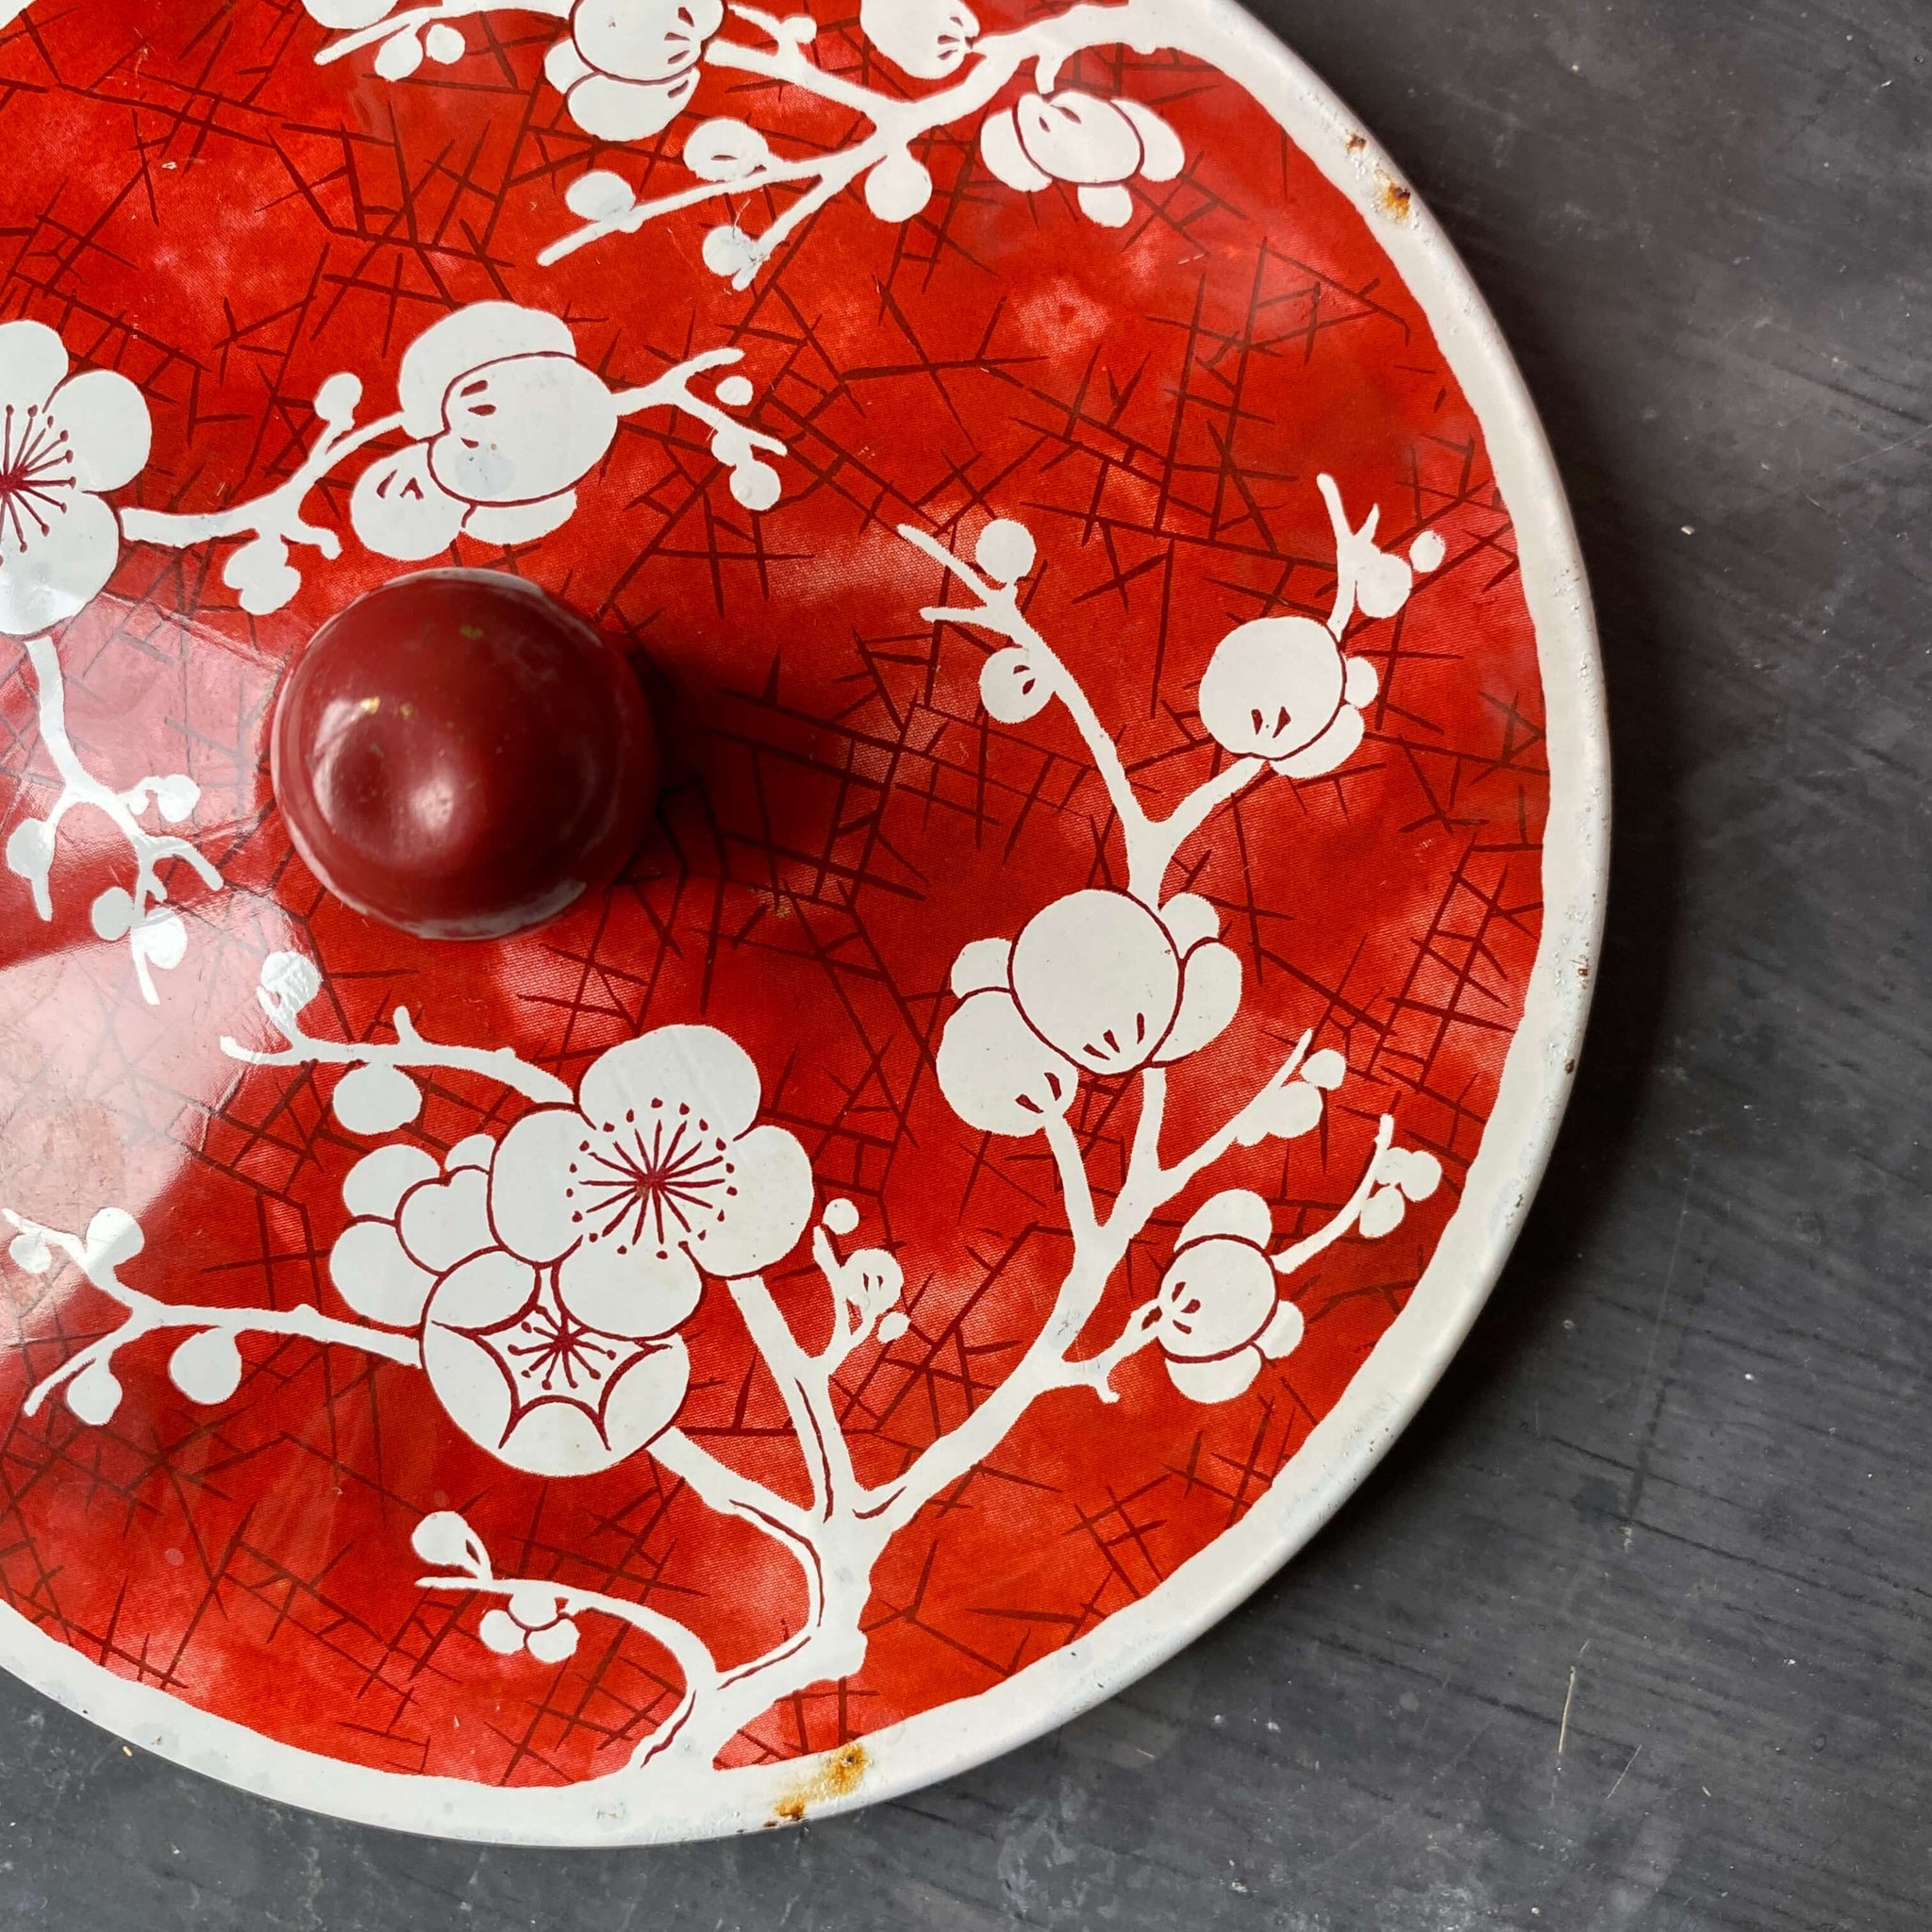 Vintage Daher Tin - Red and White Cherry Blossoms